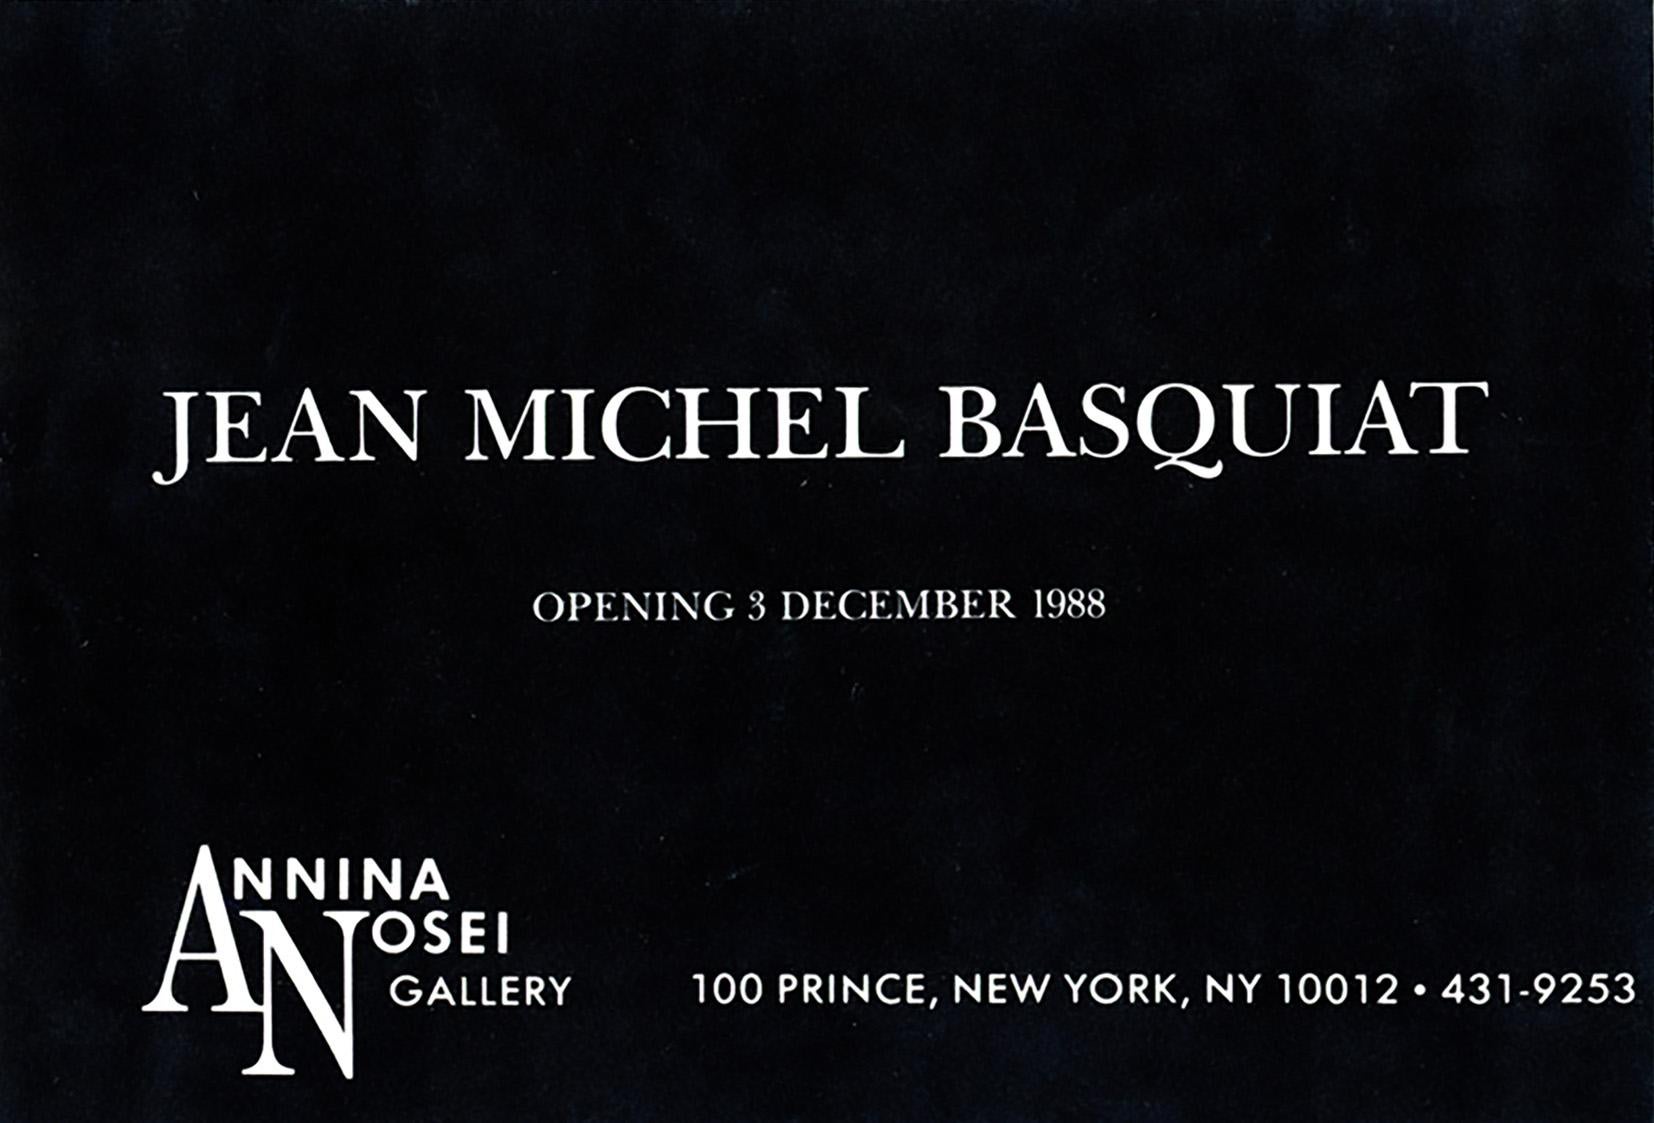 Jean-Michel Basquiat, Annina Nosei Gallery, New York, 1982-1988:
A set of 2 rare vintage original Basquiat announcement cards from 1982 & 1988, respectively published on the occasion(s) of:  

- ‘Basquiat Anatomy’ 1982 (a suite of 18 screen